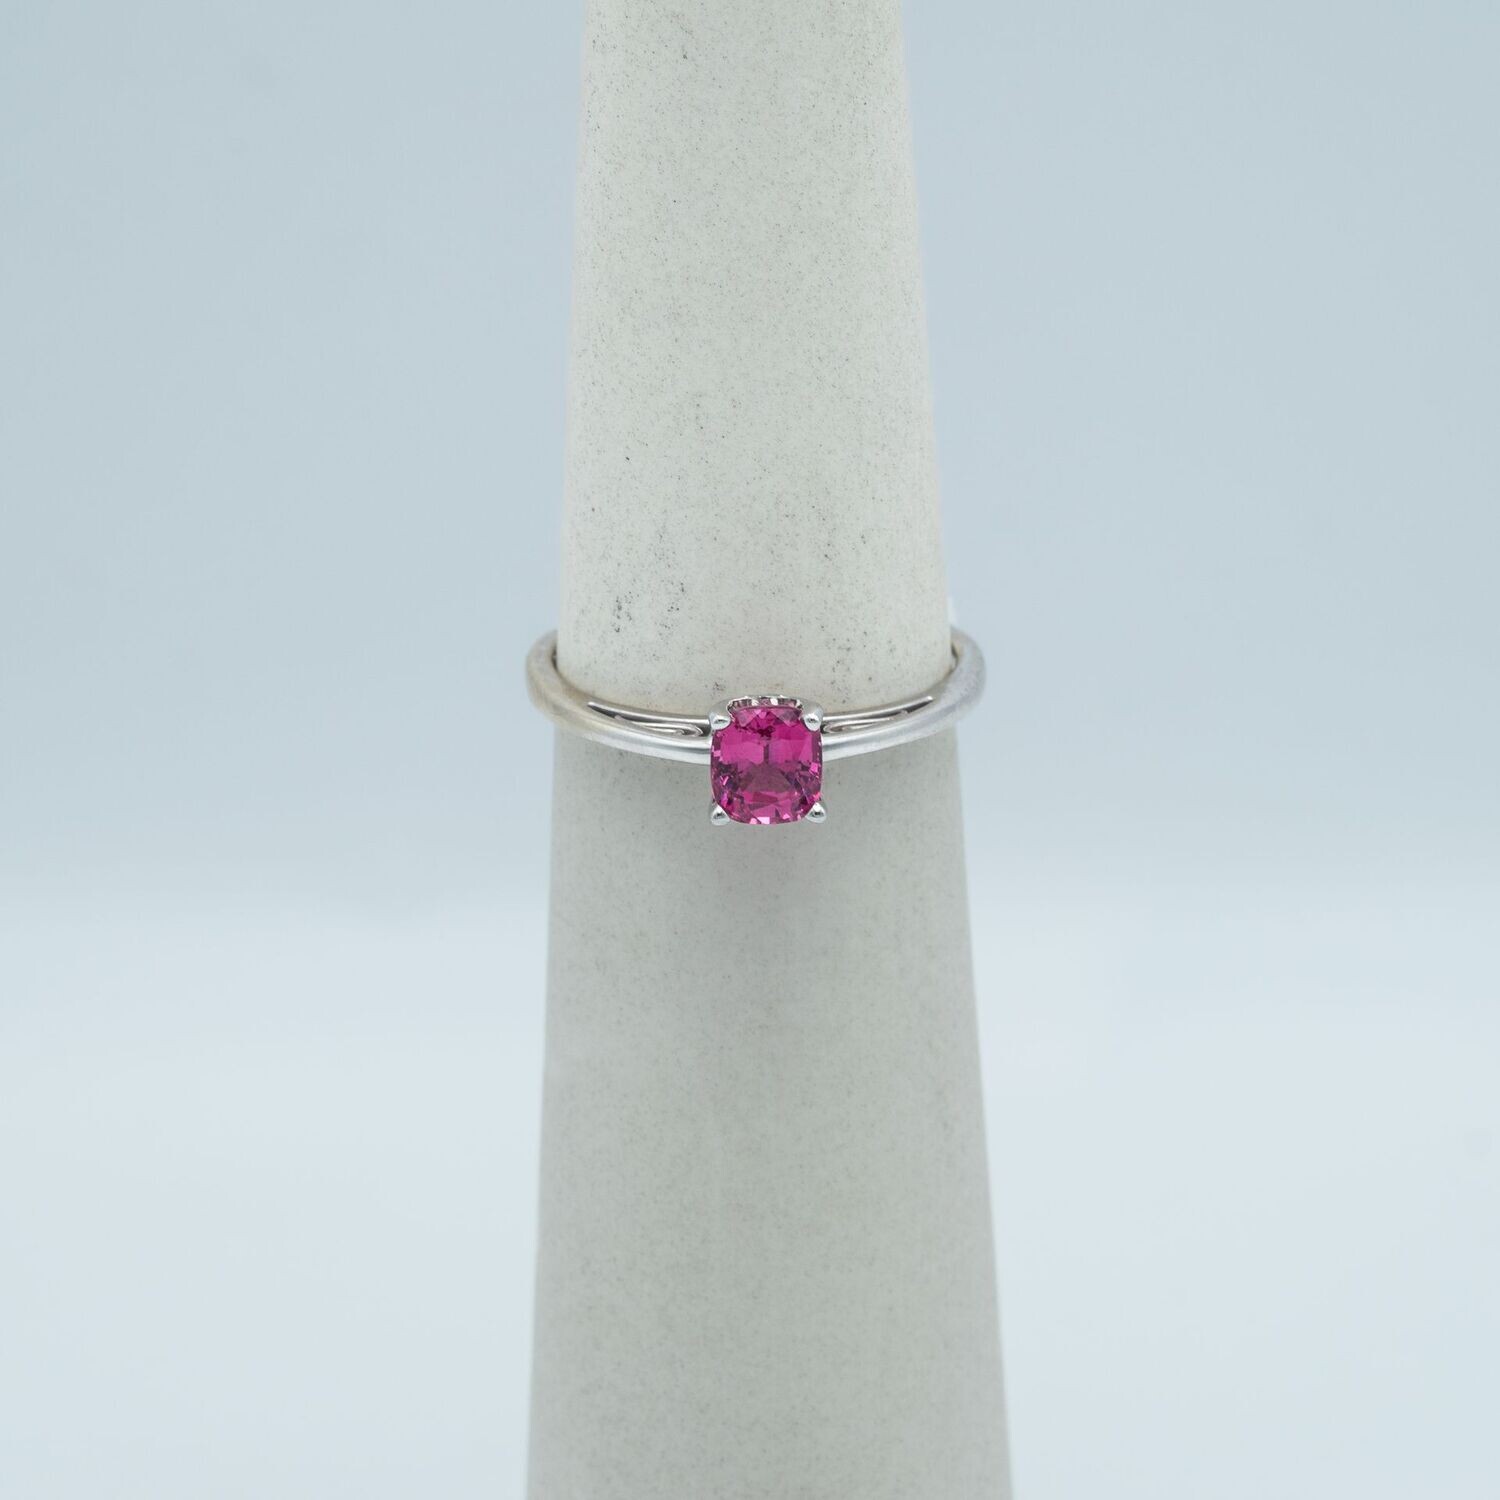 14K White Gold Pink Spinel Cushion Solitare Ring